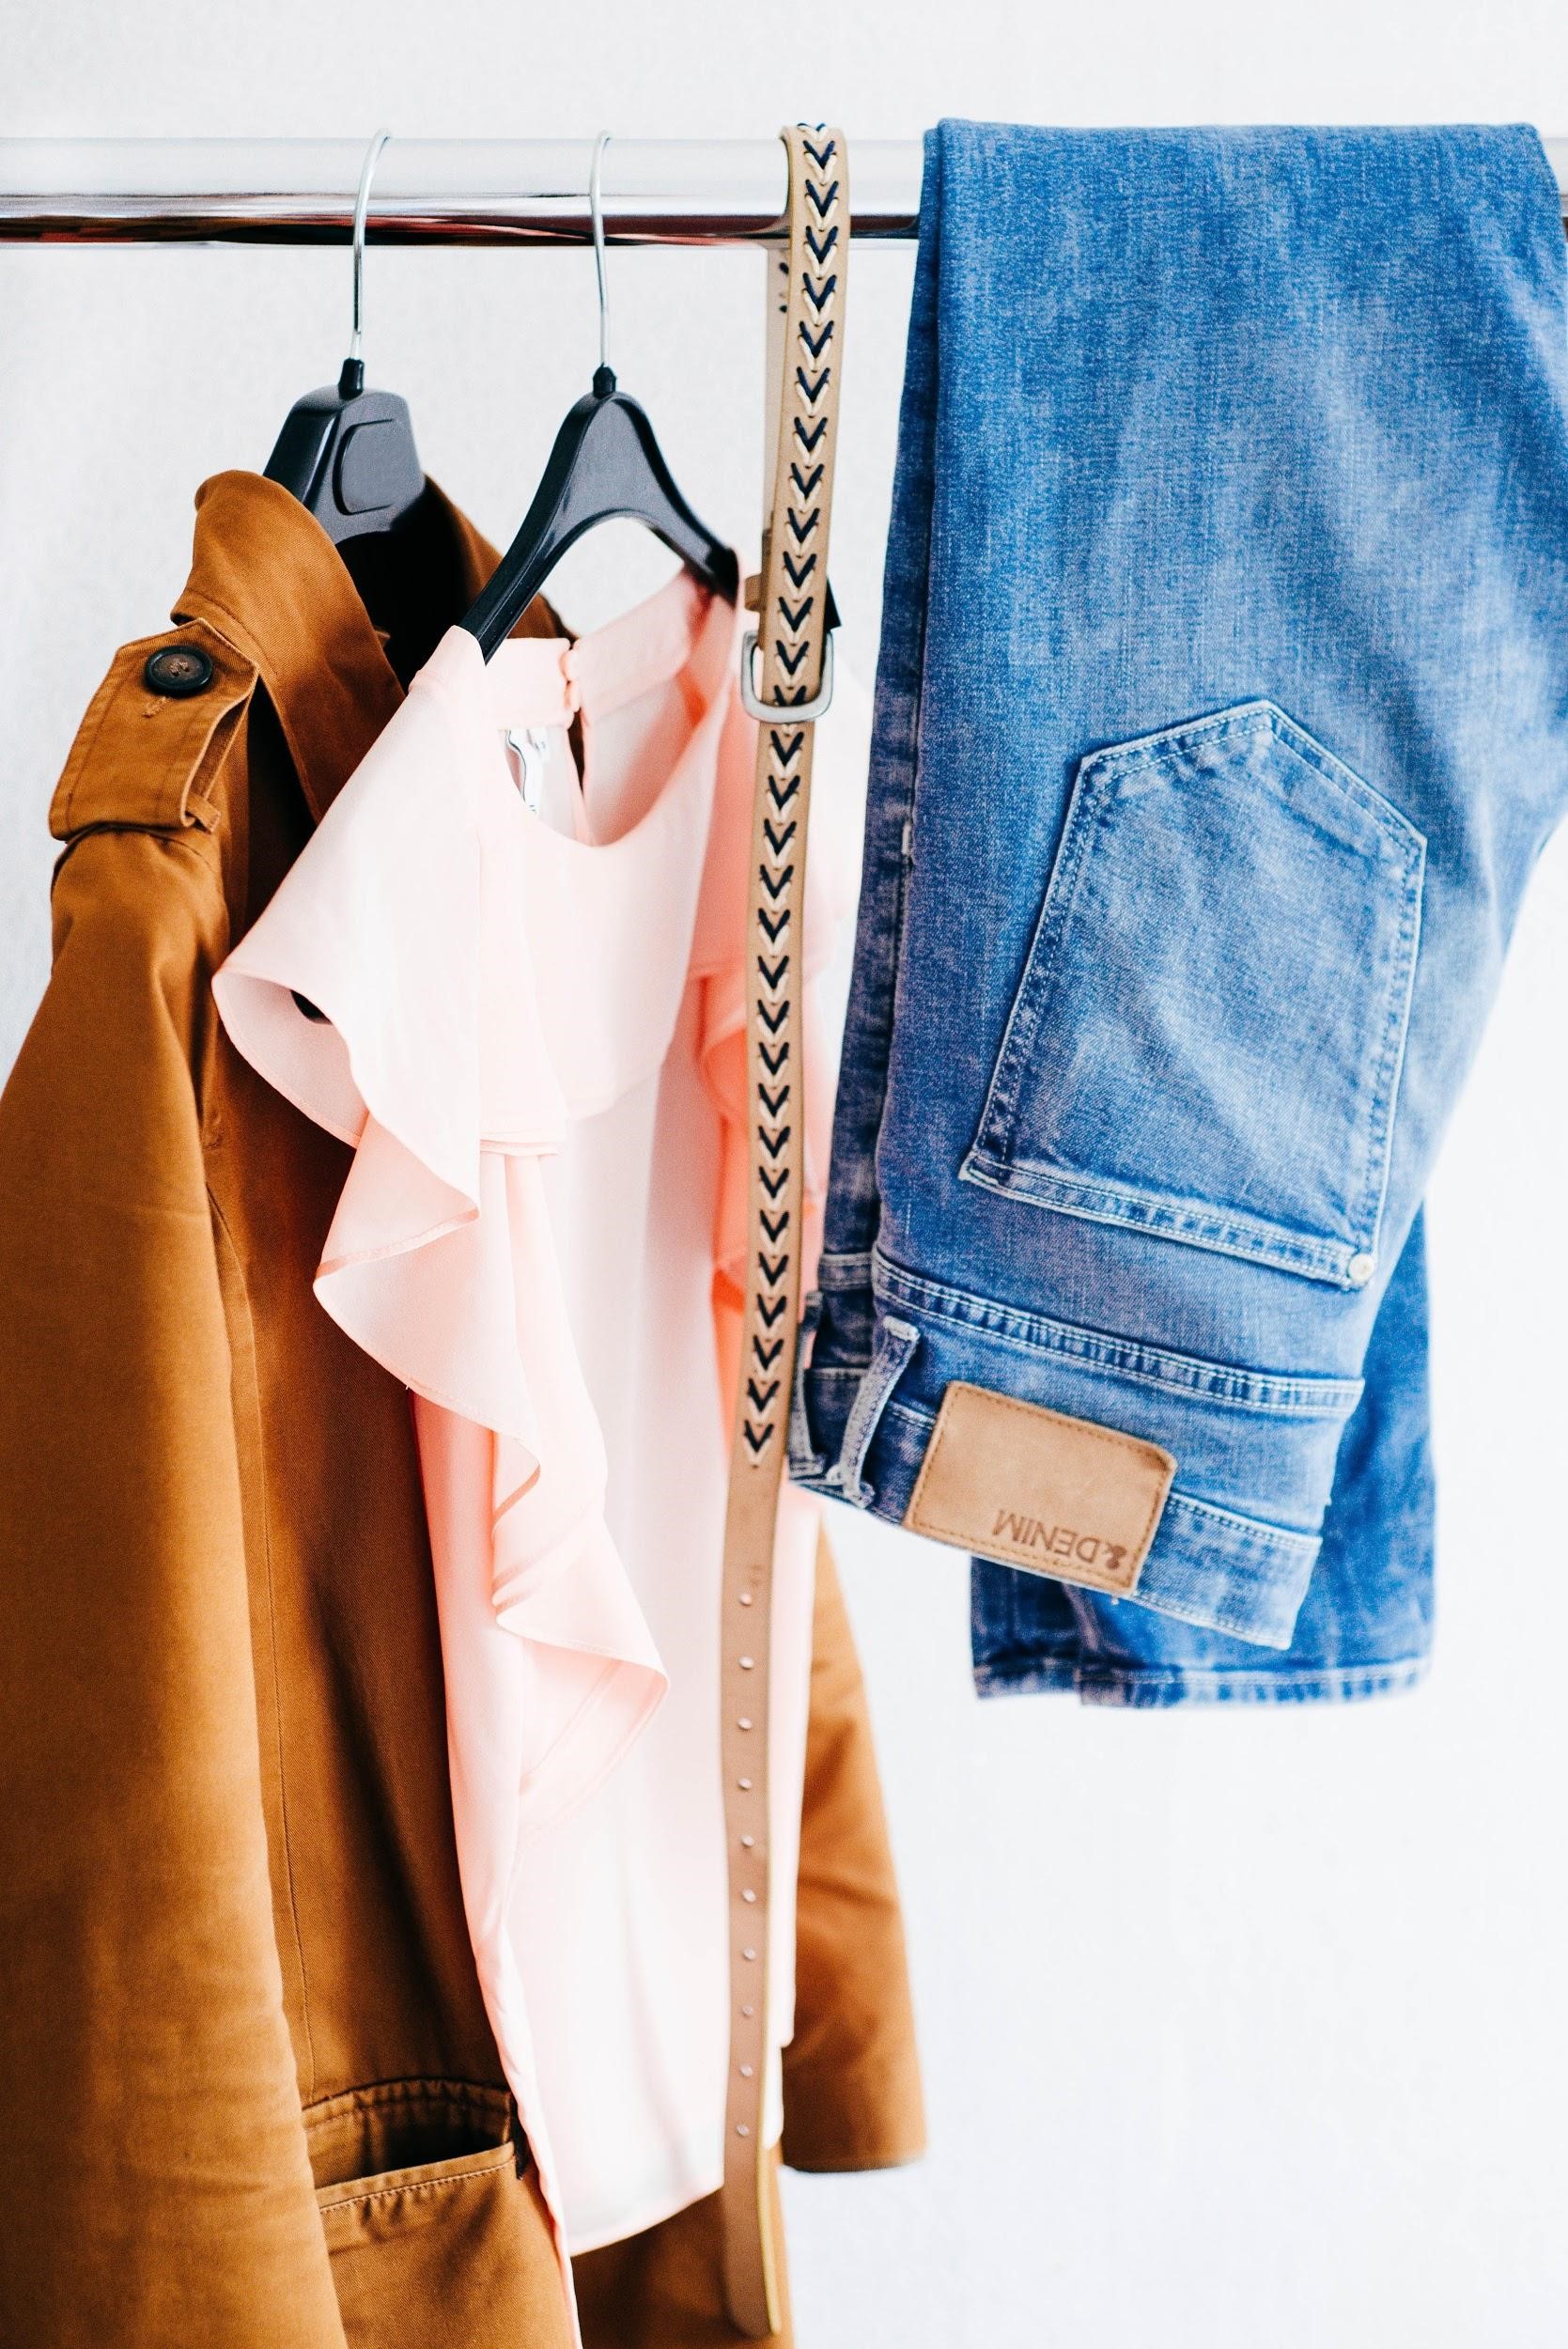 Save money while you fill your closet with these great apps!